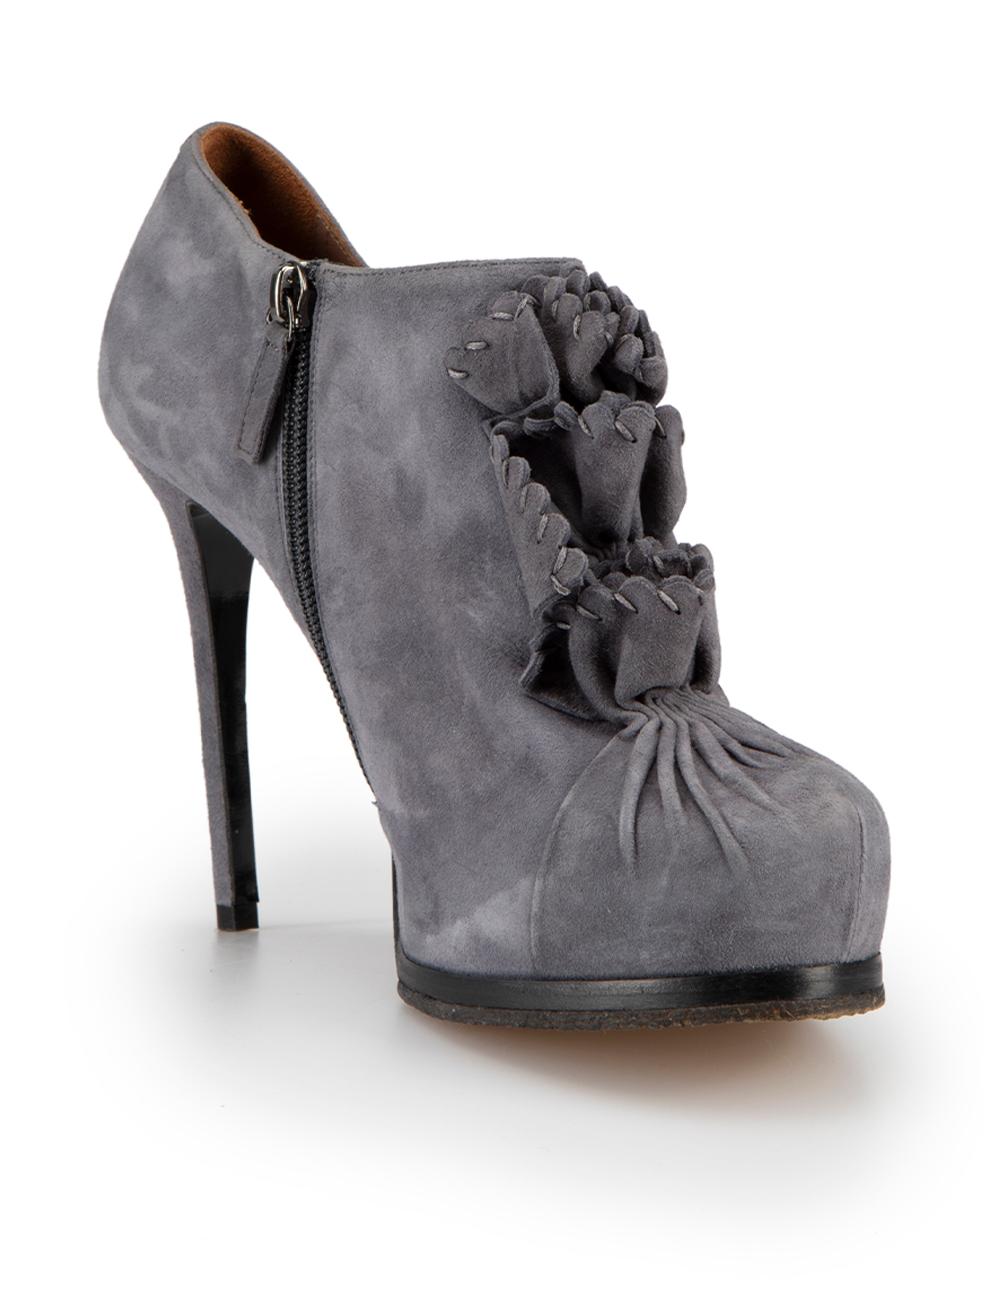 CONDITION is Good. Minor wear to shoes is evident. Light wear to right shoe left-side and both shoe heels with scuff marks on this used Tabitha Simmons designer resale item. 



Details


Grey

Suede

Ankle boots

Ruched accent with ruffles